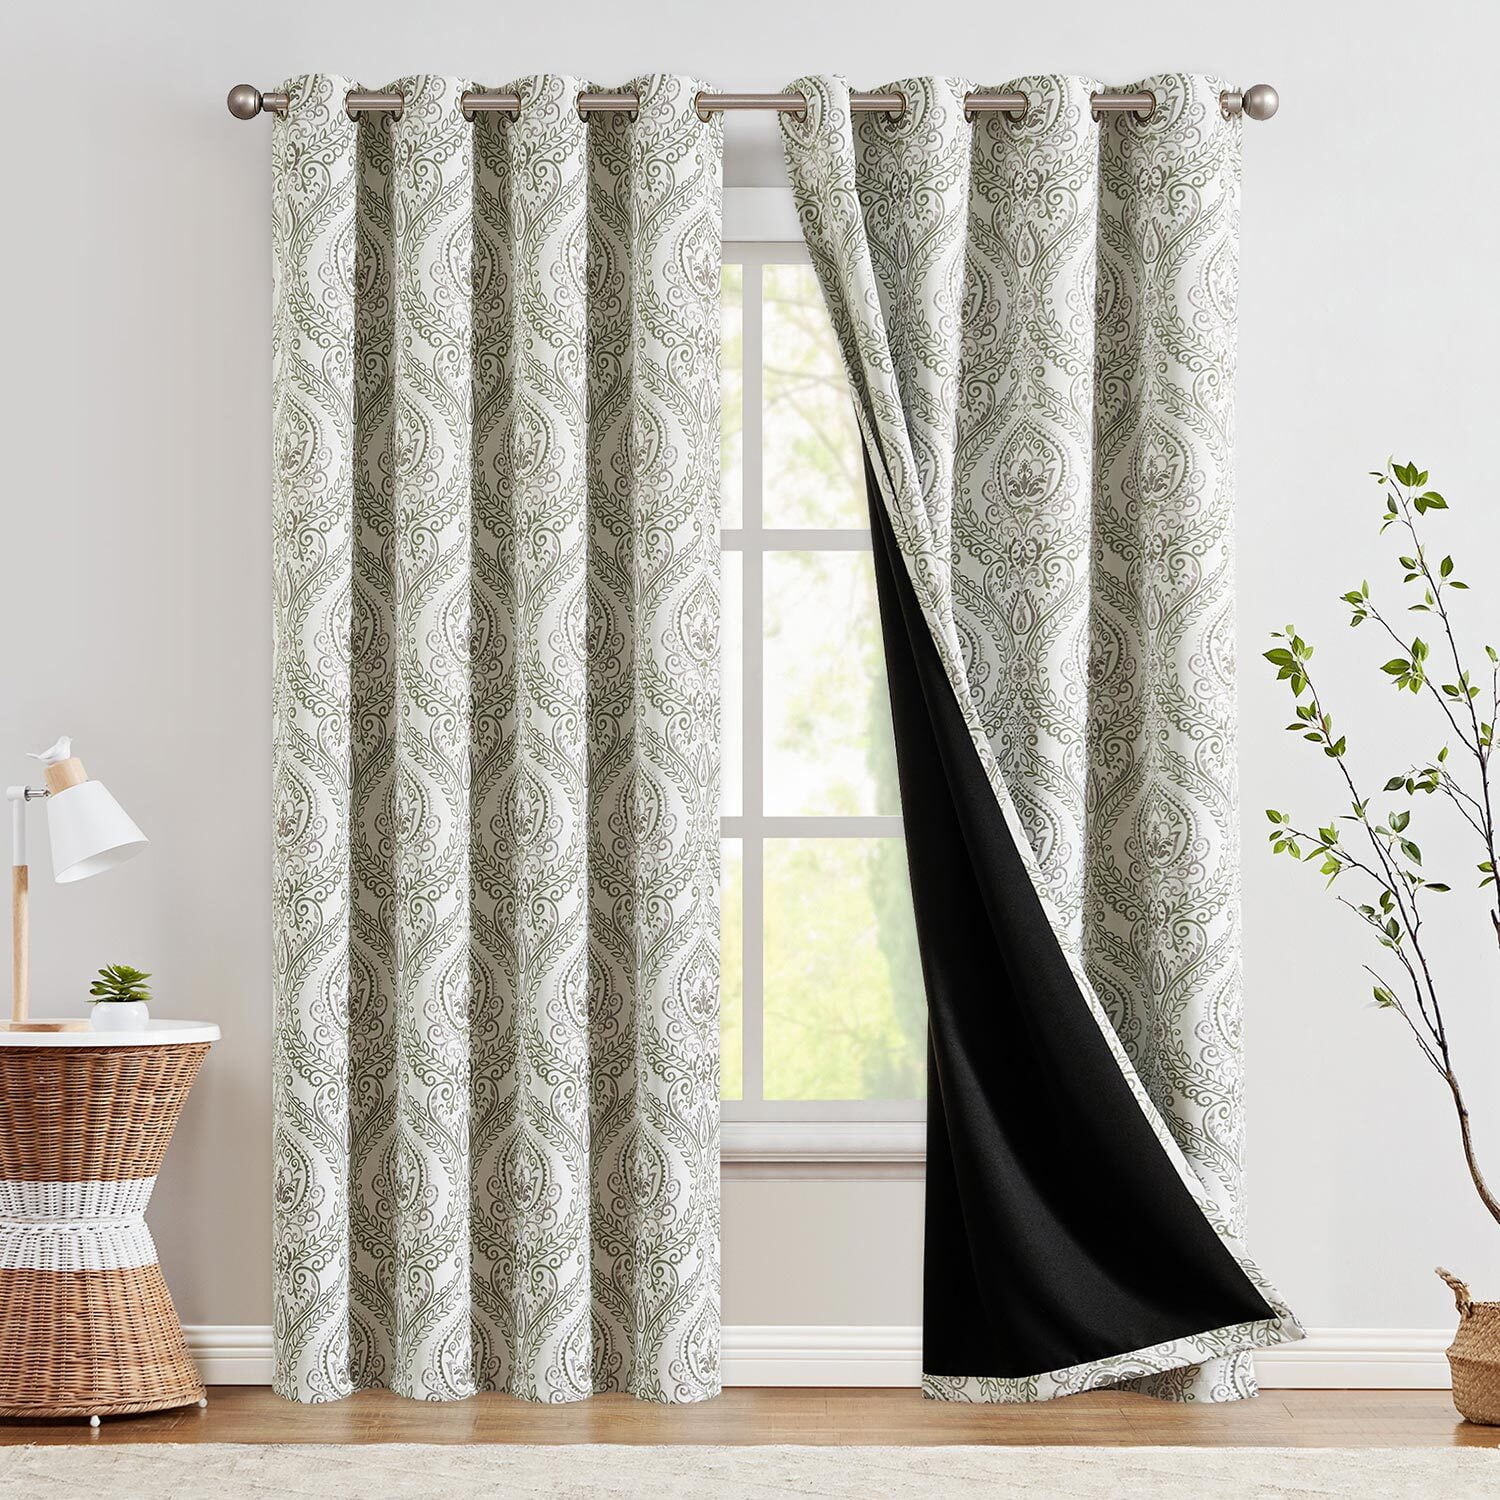 Curtainking 100% Blackout Curtains 96 in Sage Green Damask Medallion Window  Curtains for Bedroom Grommet Thermal Insulated Drapes for Living Room